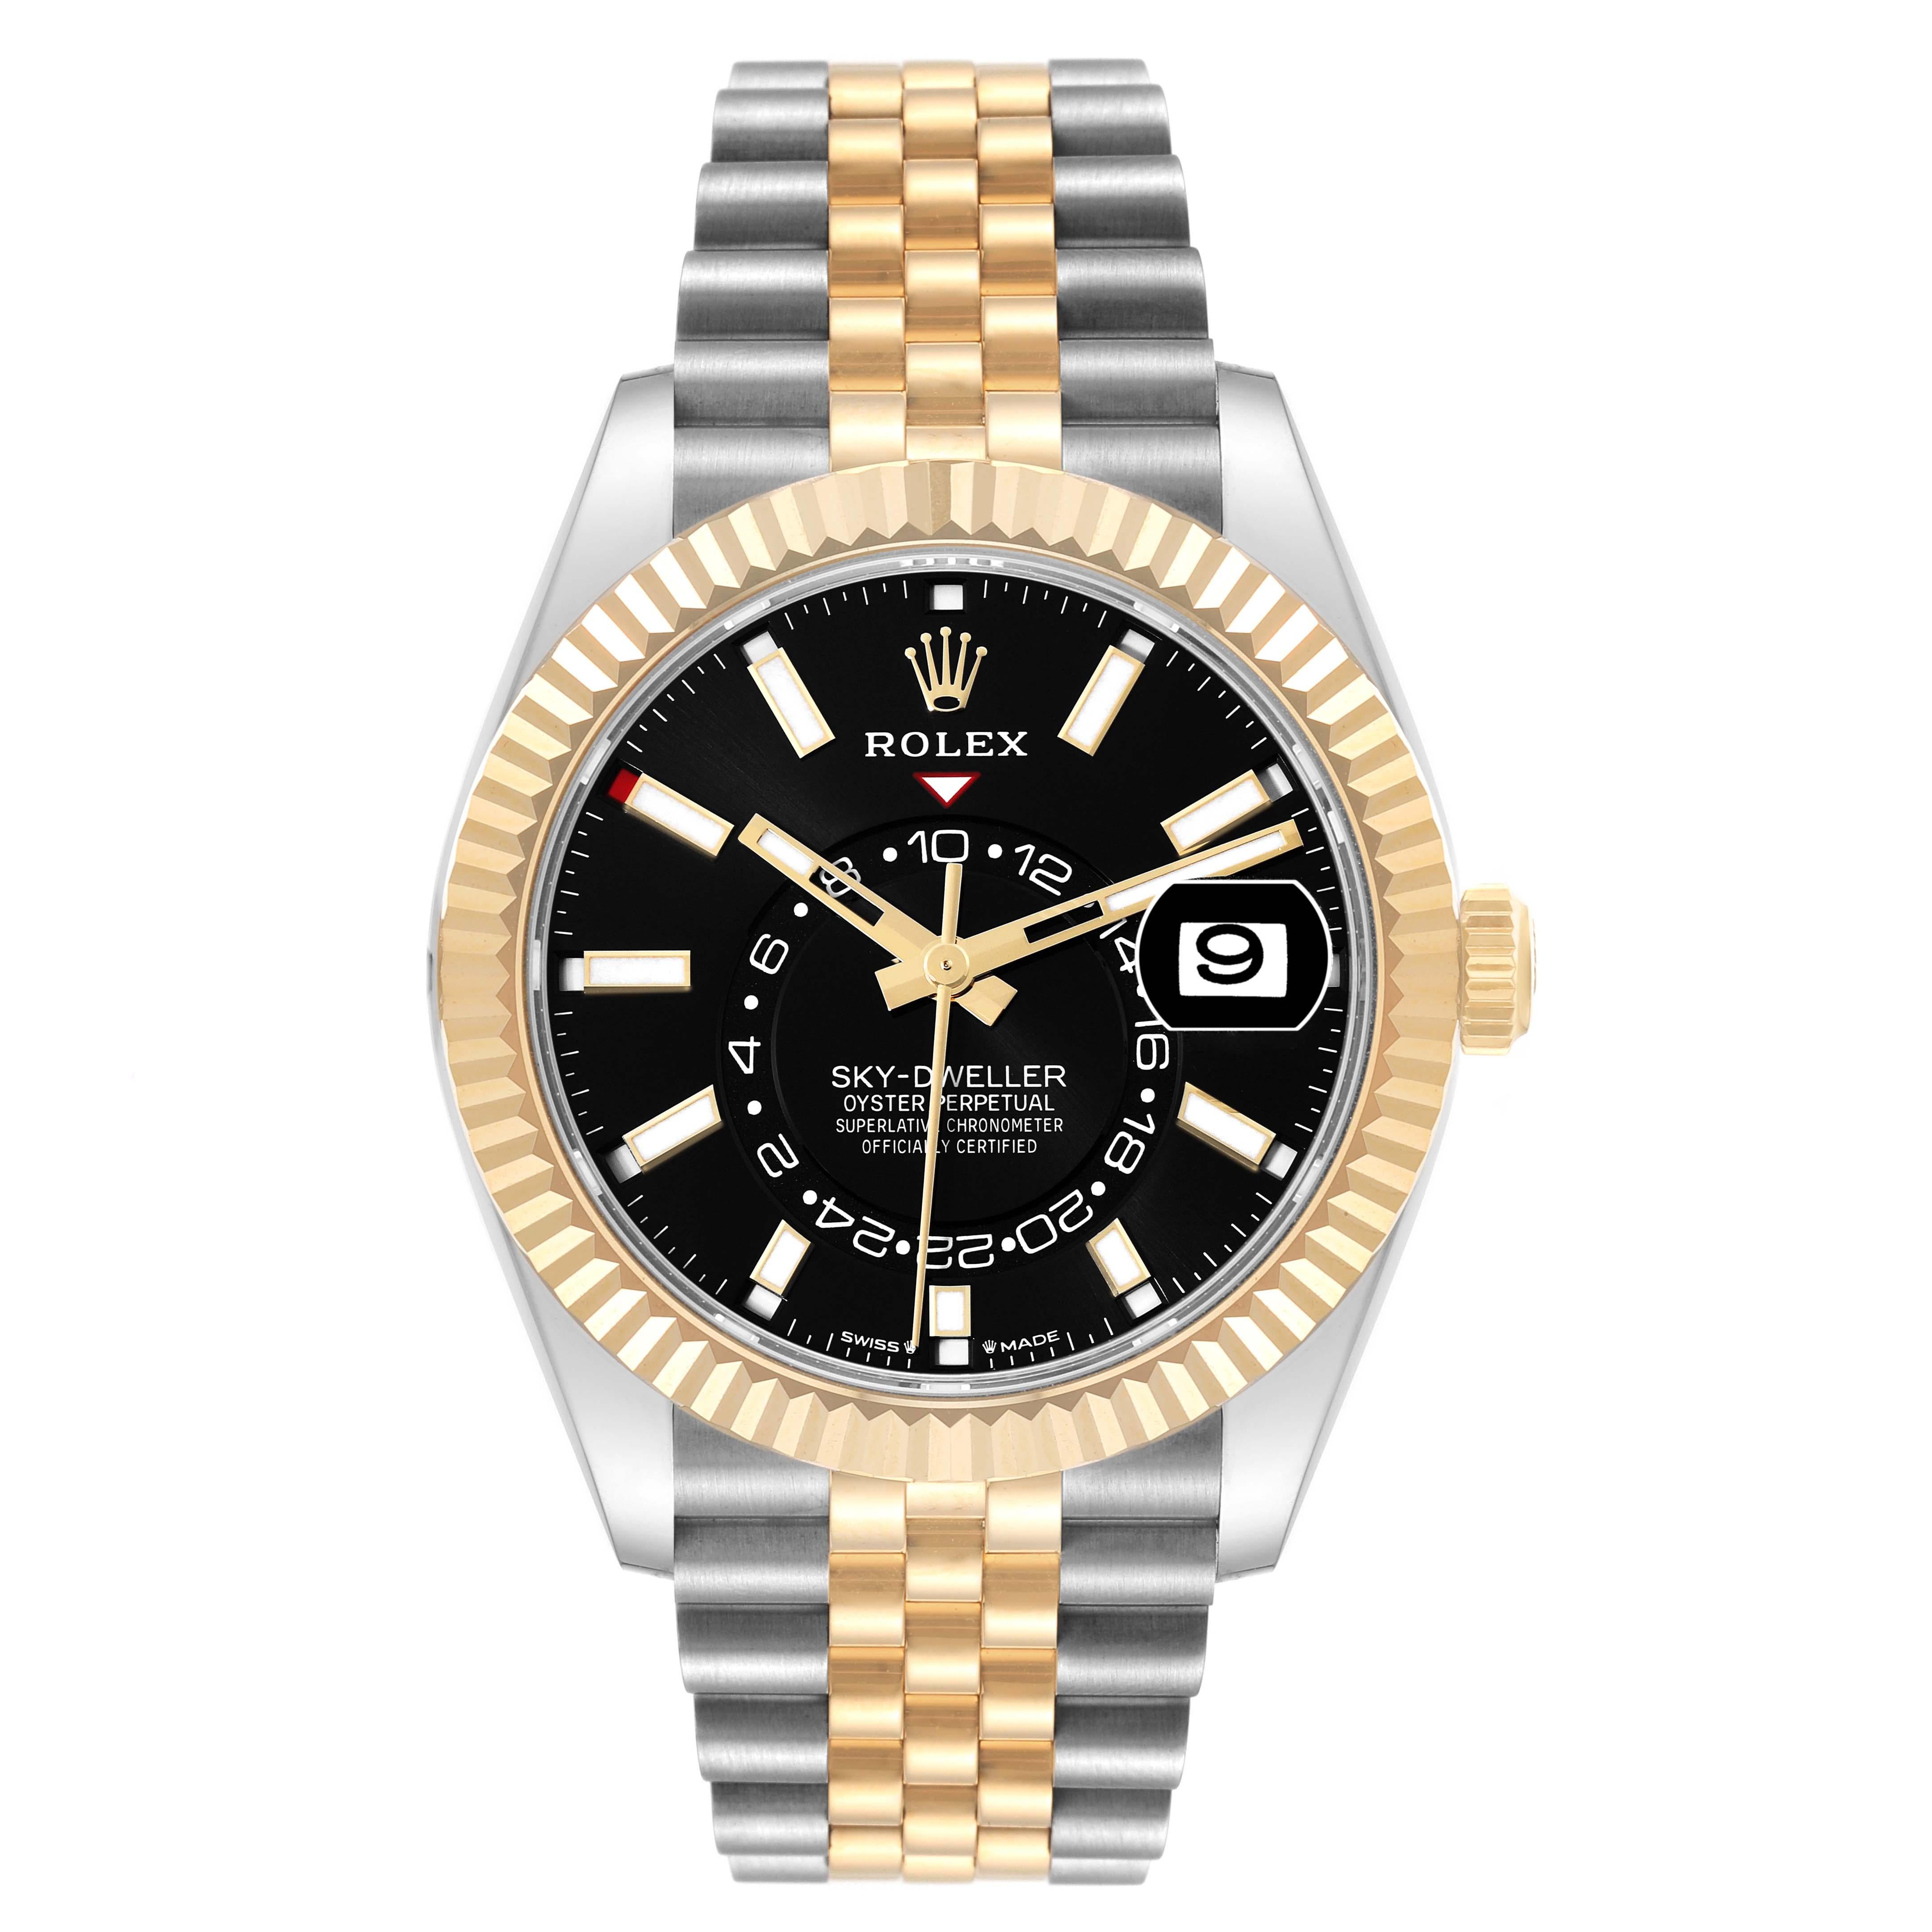 Rolex Sky Dweller Steel Yellow Gold Black Dial Mens Watch 336933 Unworn. Officially certified chronometer automatic self-winding movement. Dual time zones, annual calendar. Paramagnetic blue Parachrom hairspring. High-performance Paraflex shock